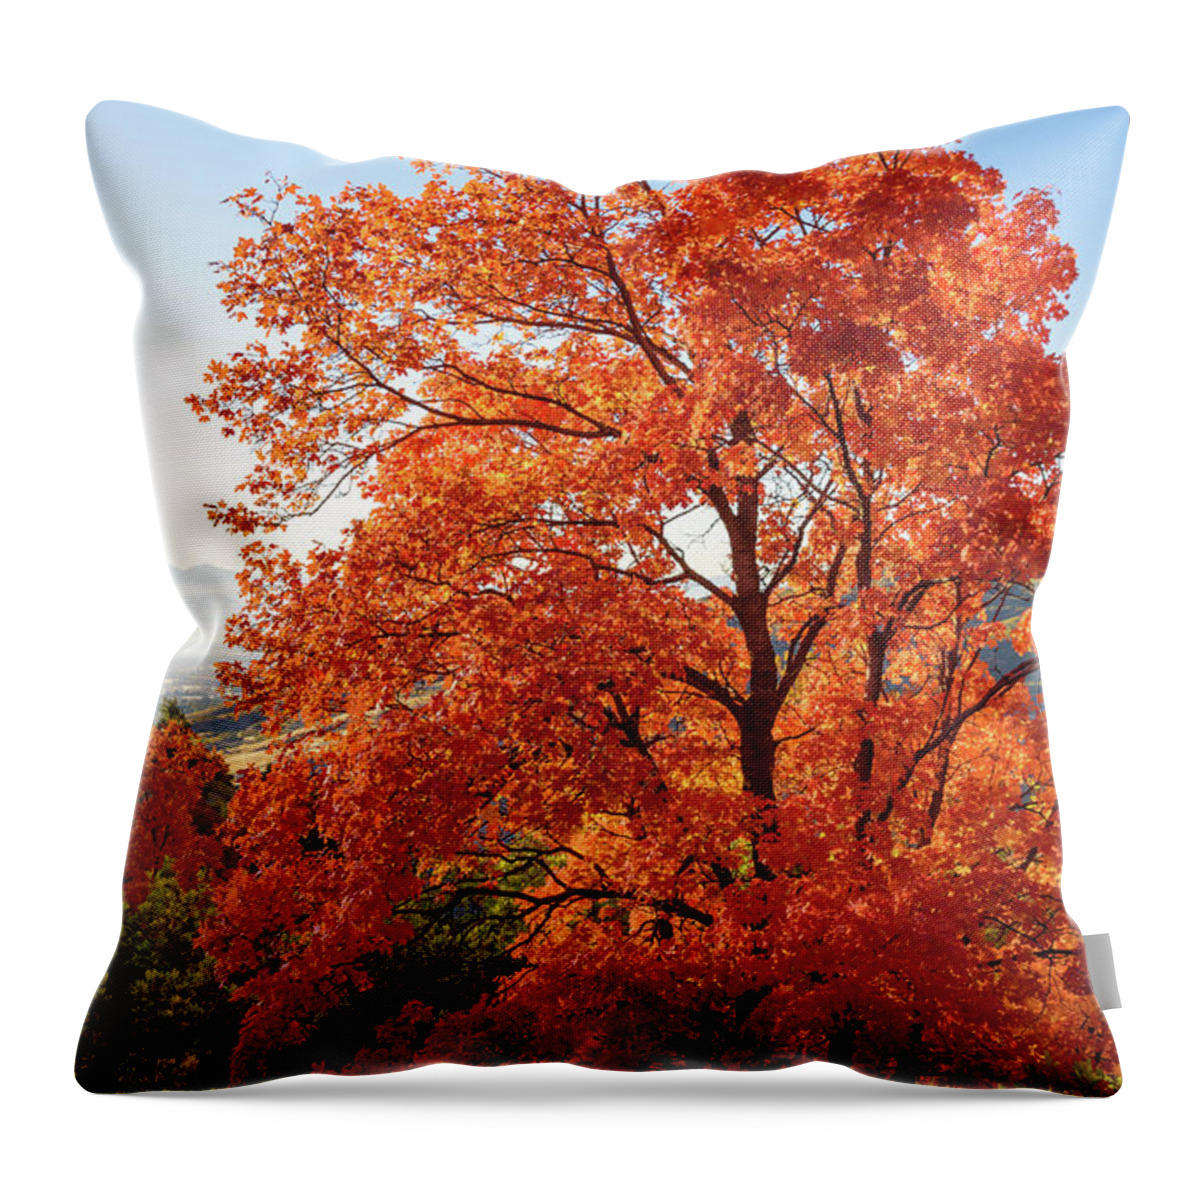 Fire Throw Pillow featuring the photograph Fire by Chad Dutson